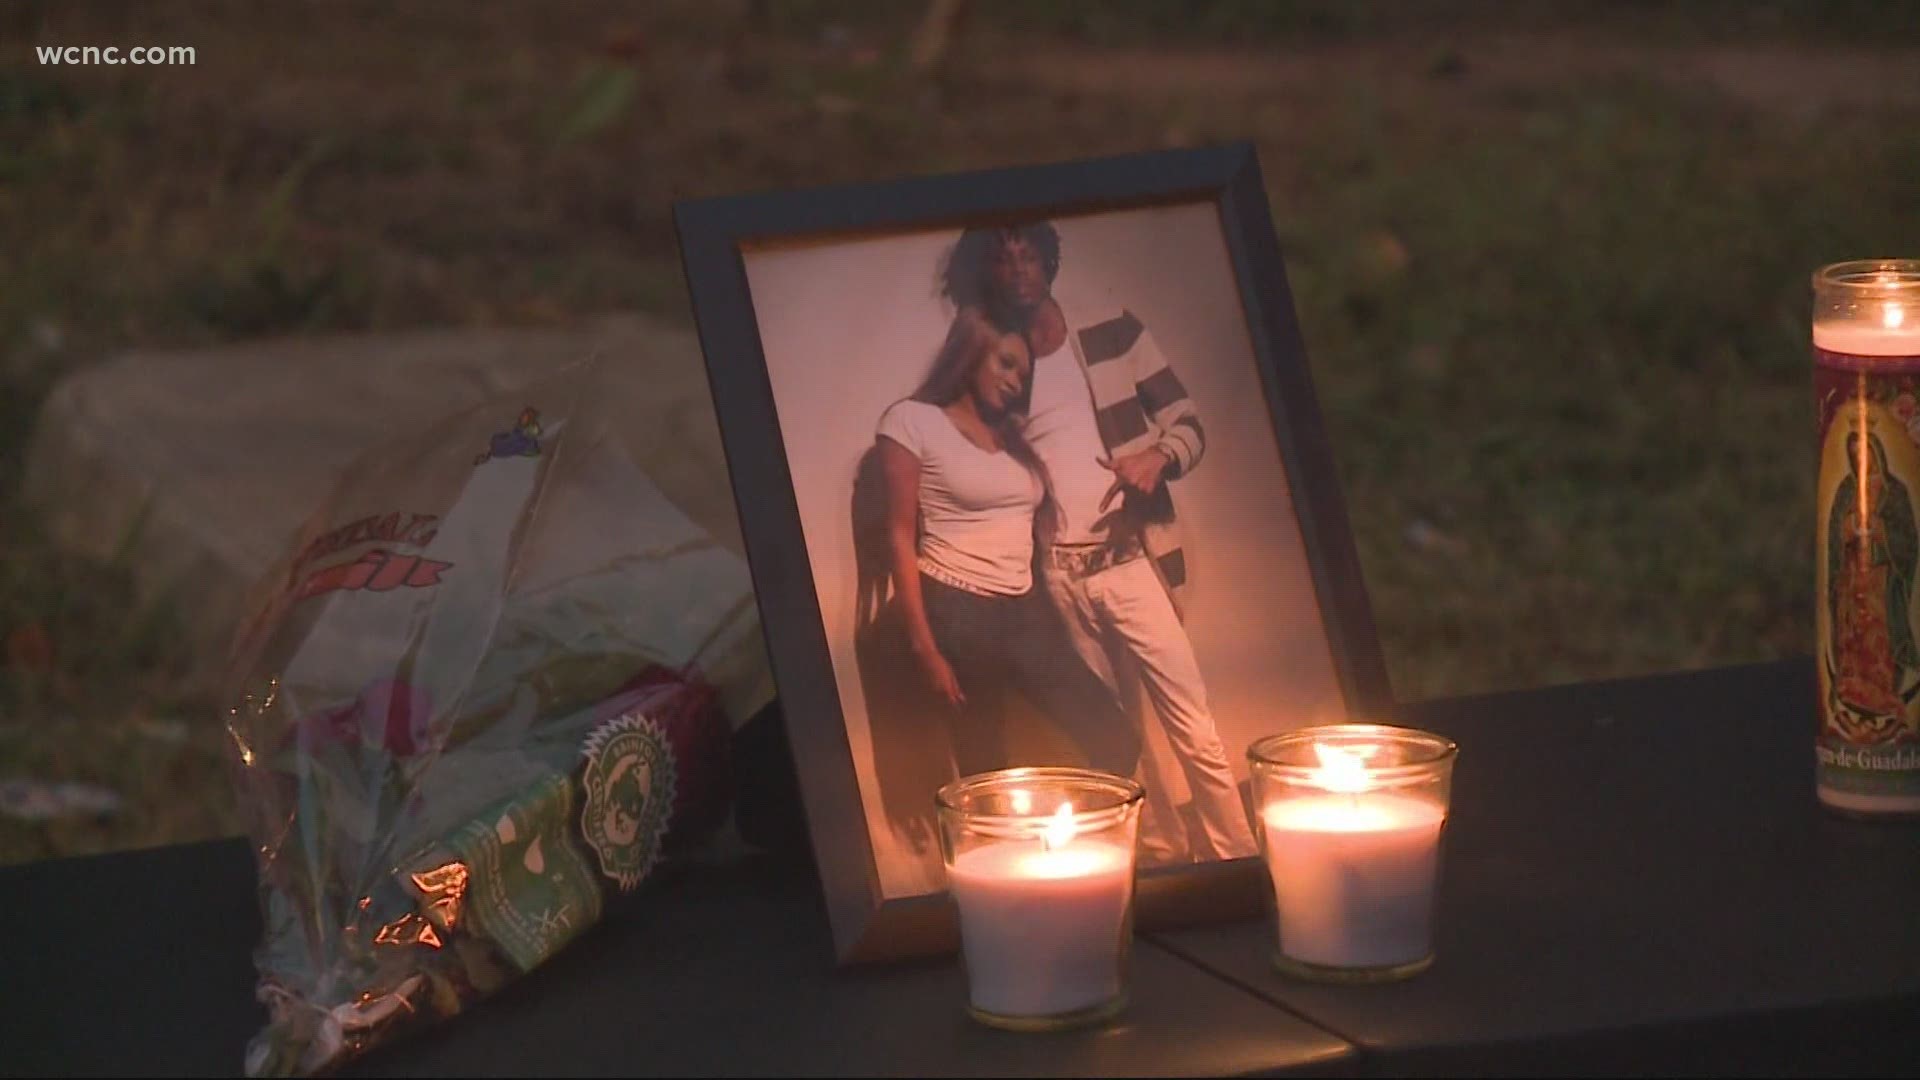 The community in east Charlotte is remembering two people killed in what police are calling a "brazen" double murder.